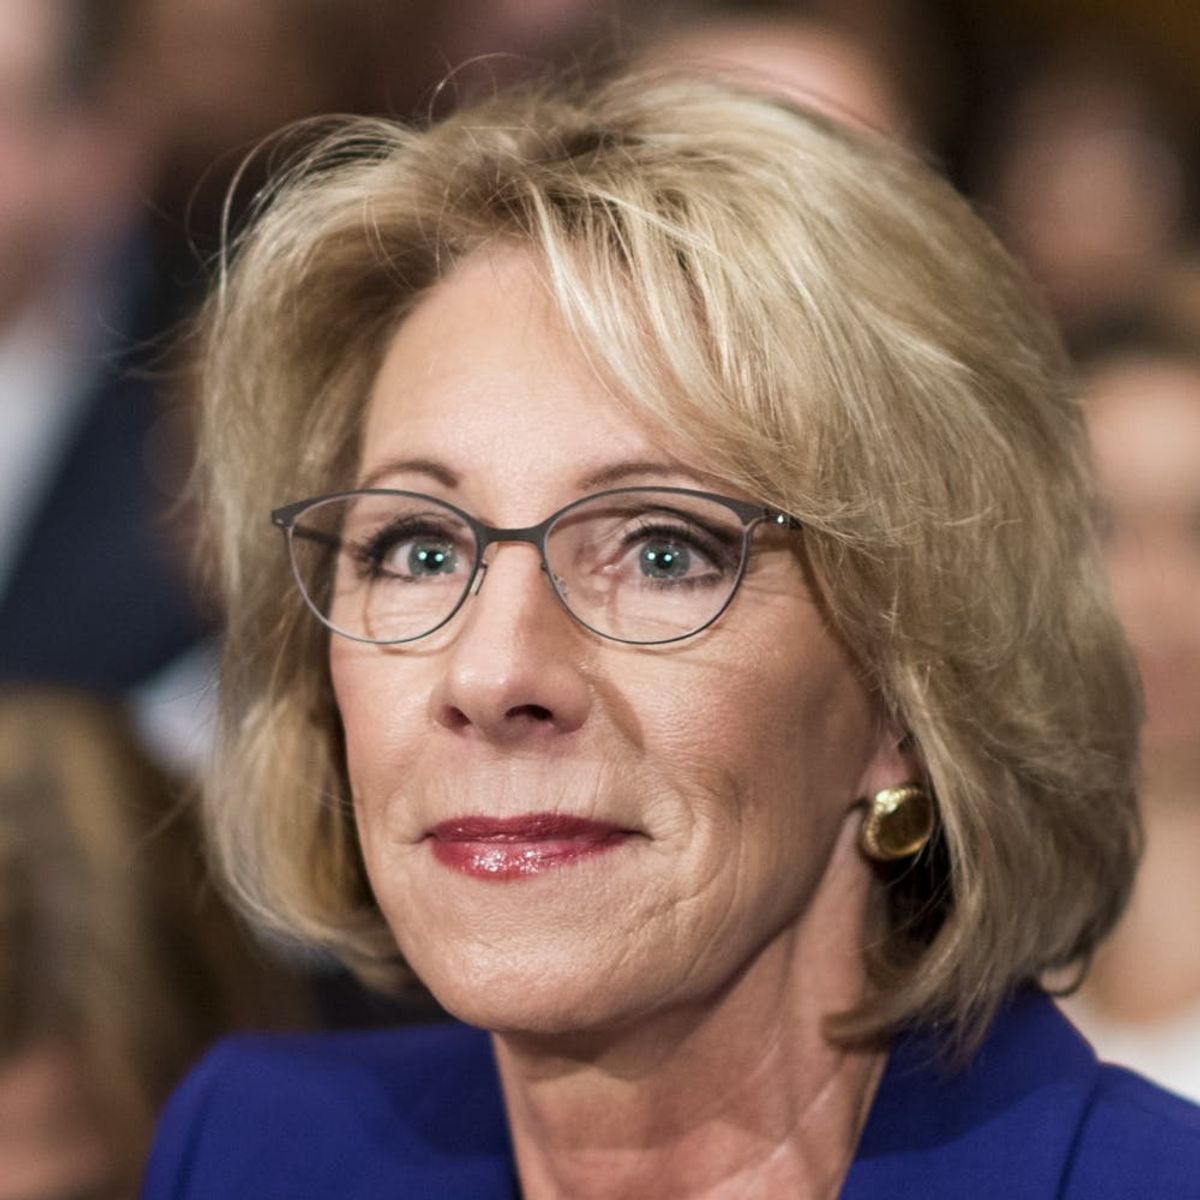 Brit + Co Community Voices: Will Betsy DeVos Leave Public Schools and Kids Behind?